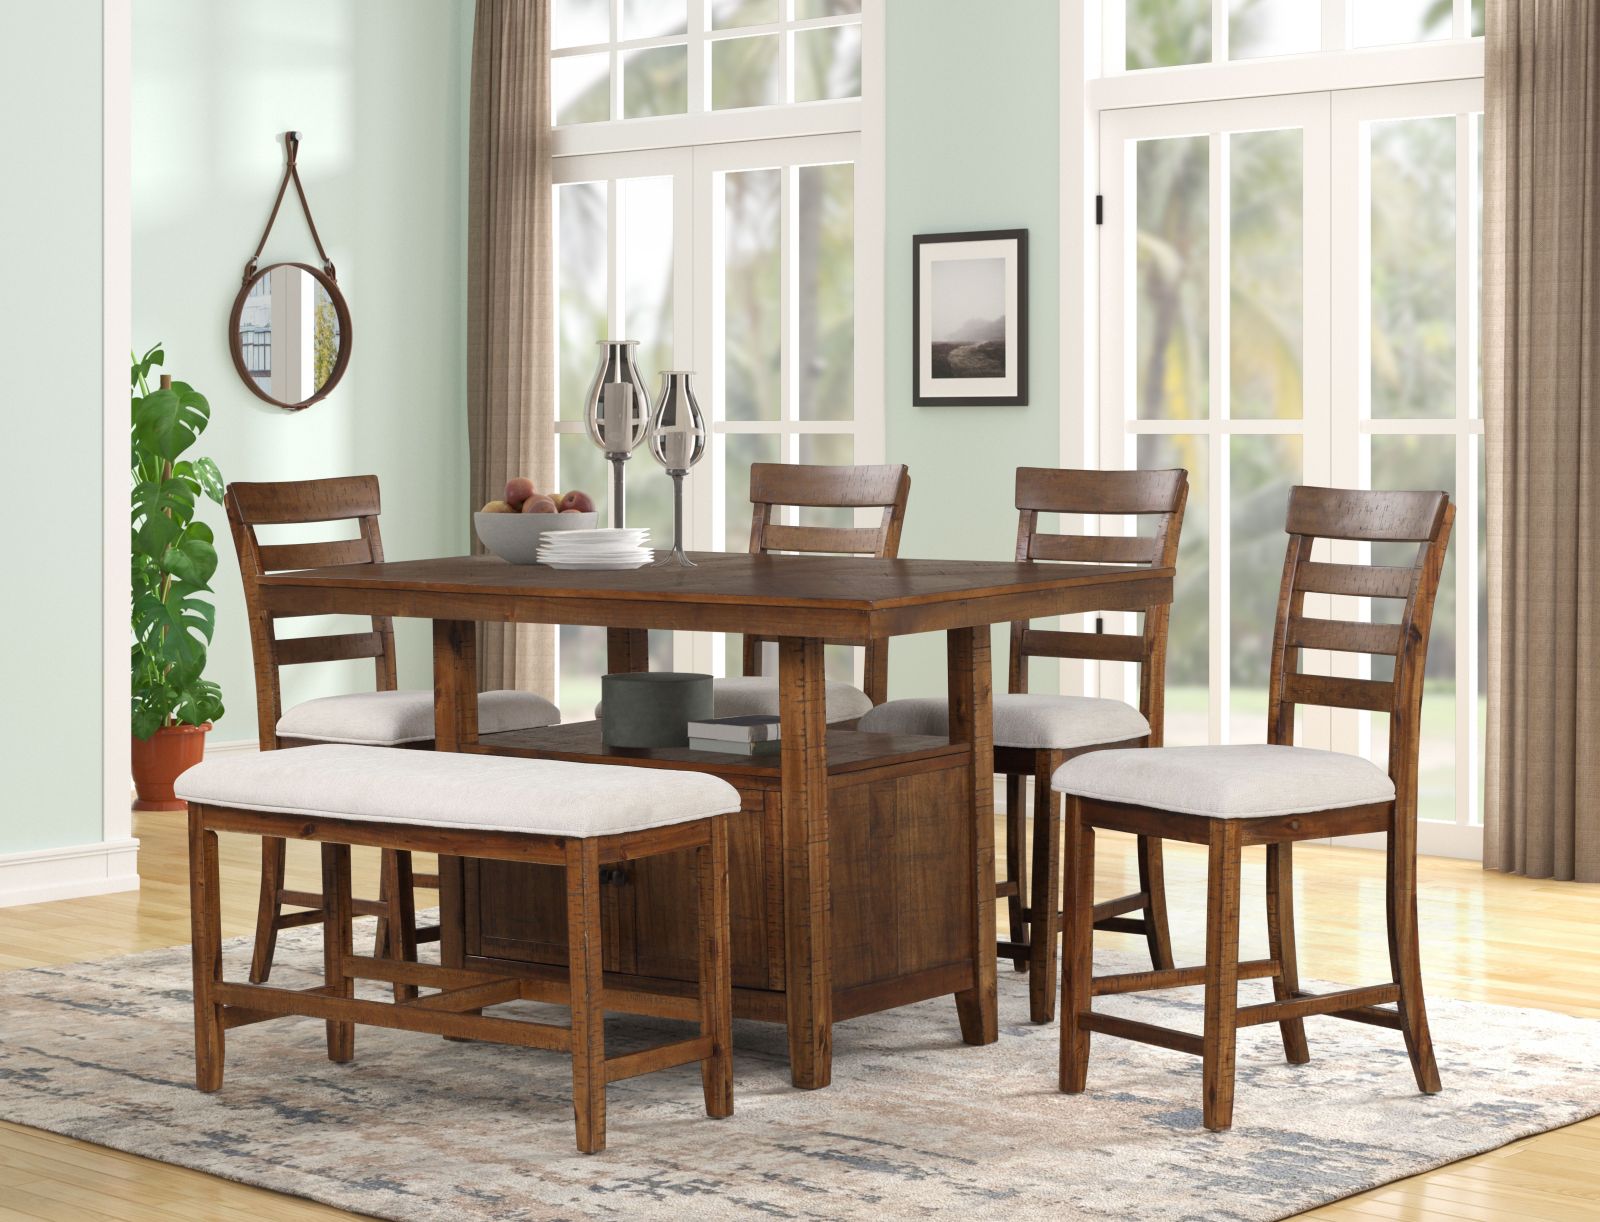 Nevada Pub Dining Table with 4 Chairs &amp; Bench